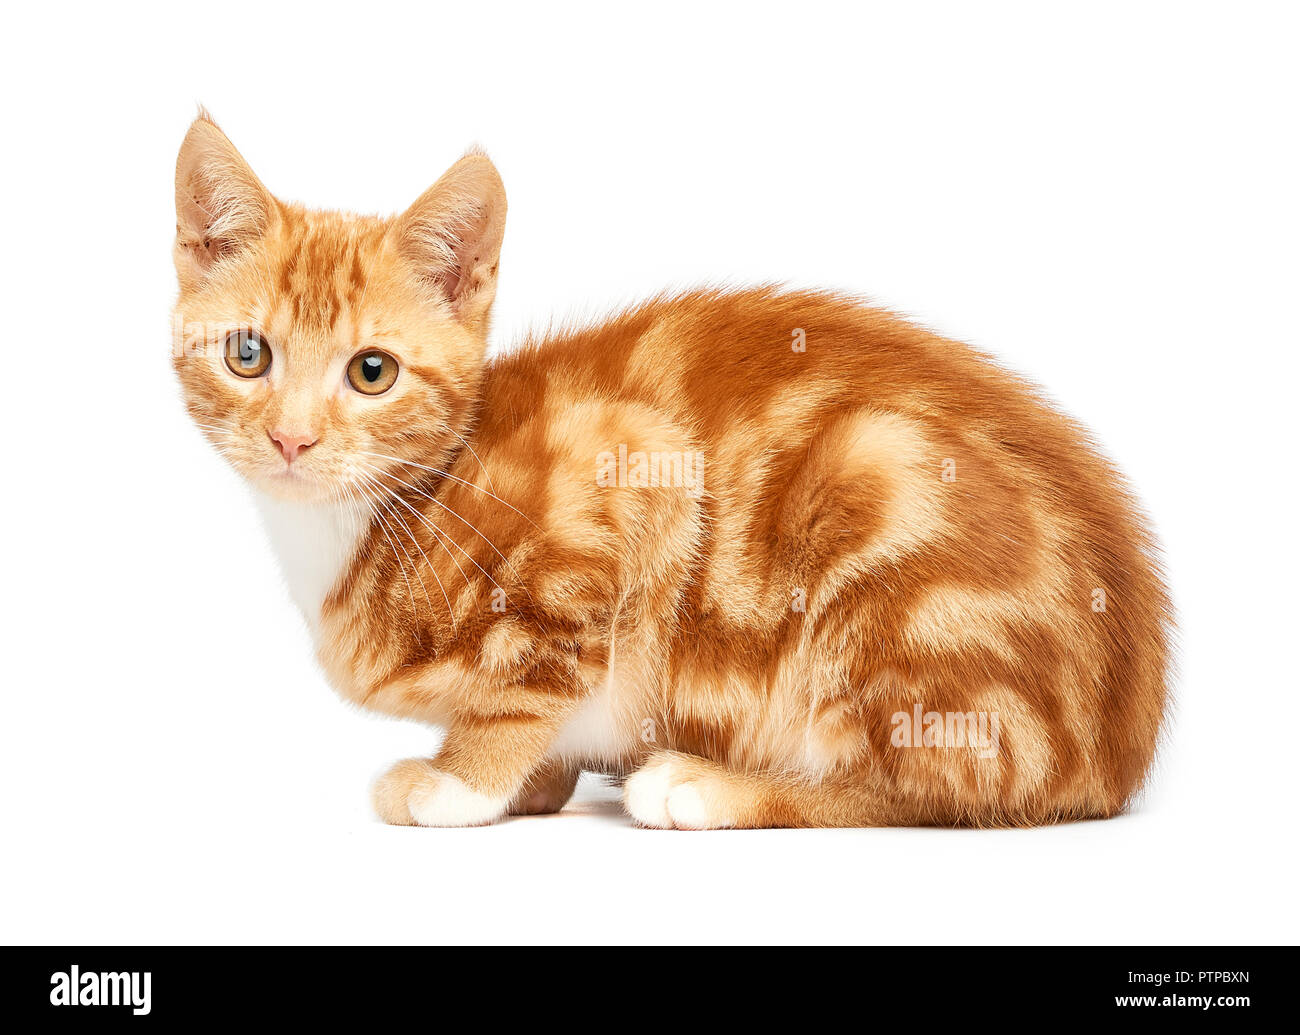 Adorable ginger red tabby striped kitten sitting isolated on white background. Stock Photo